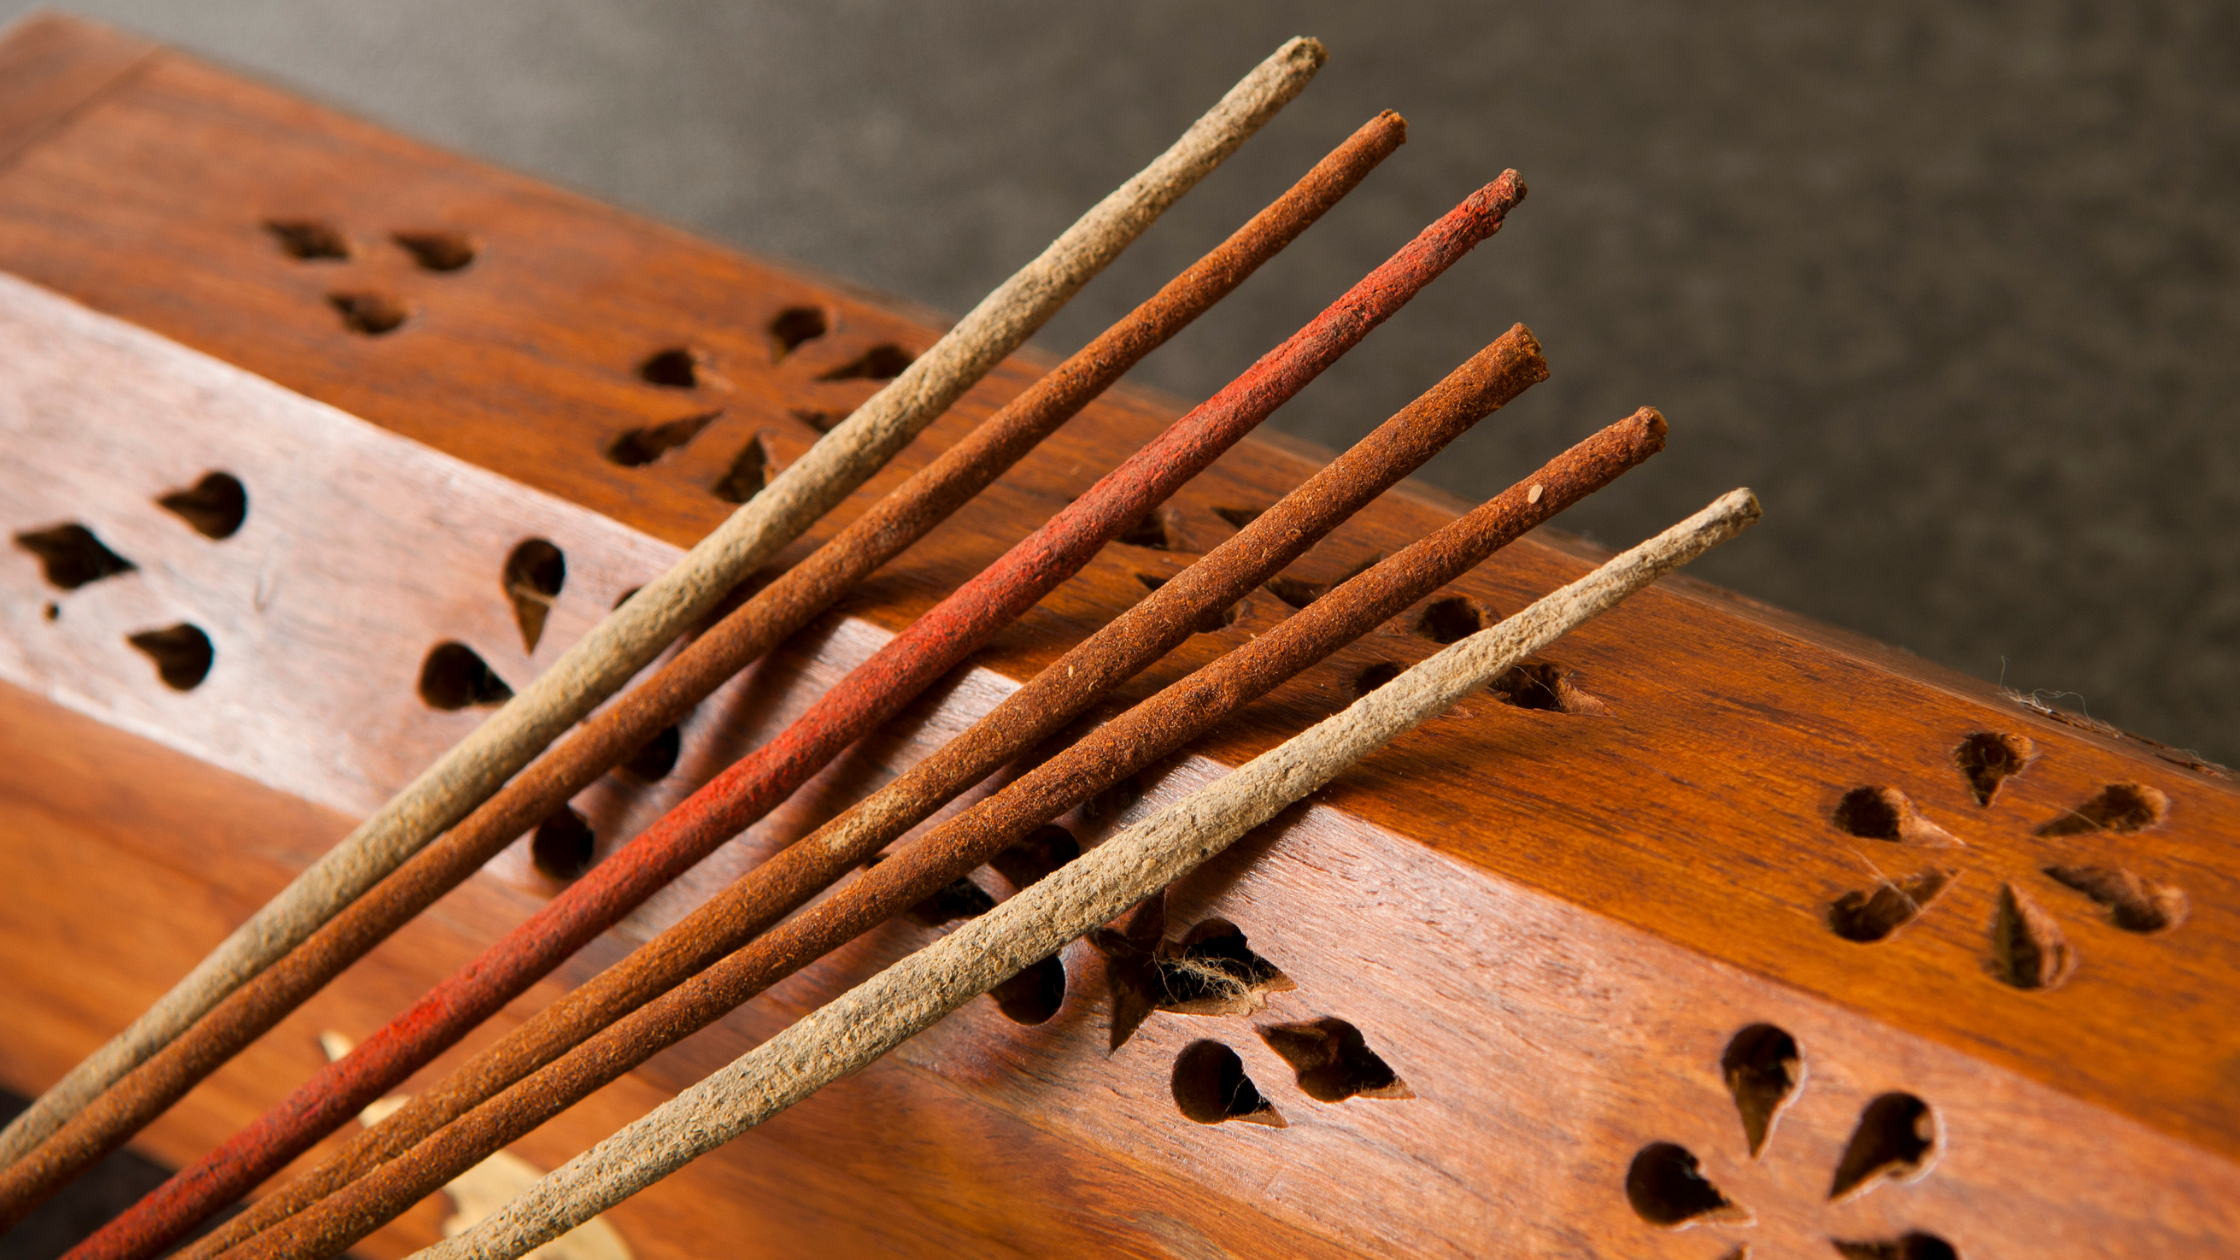   incense sticks with wooden box  